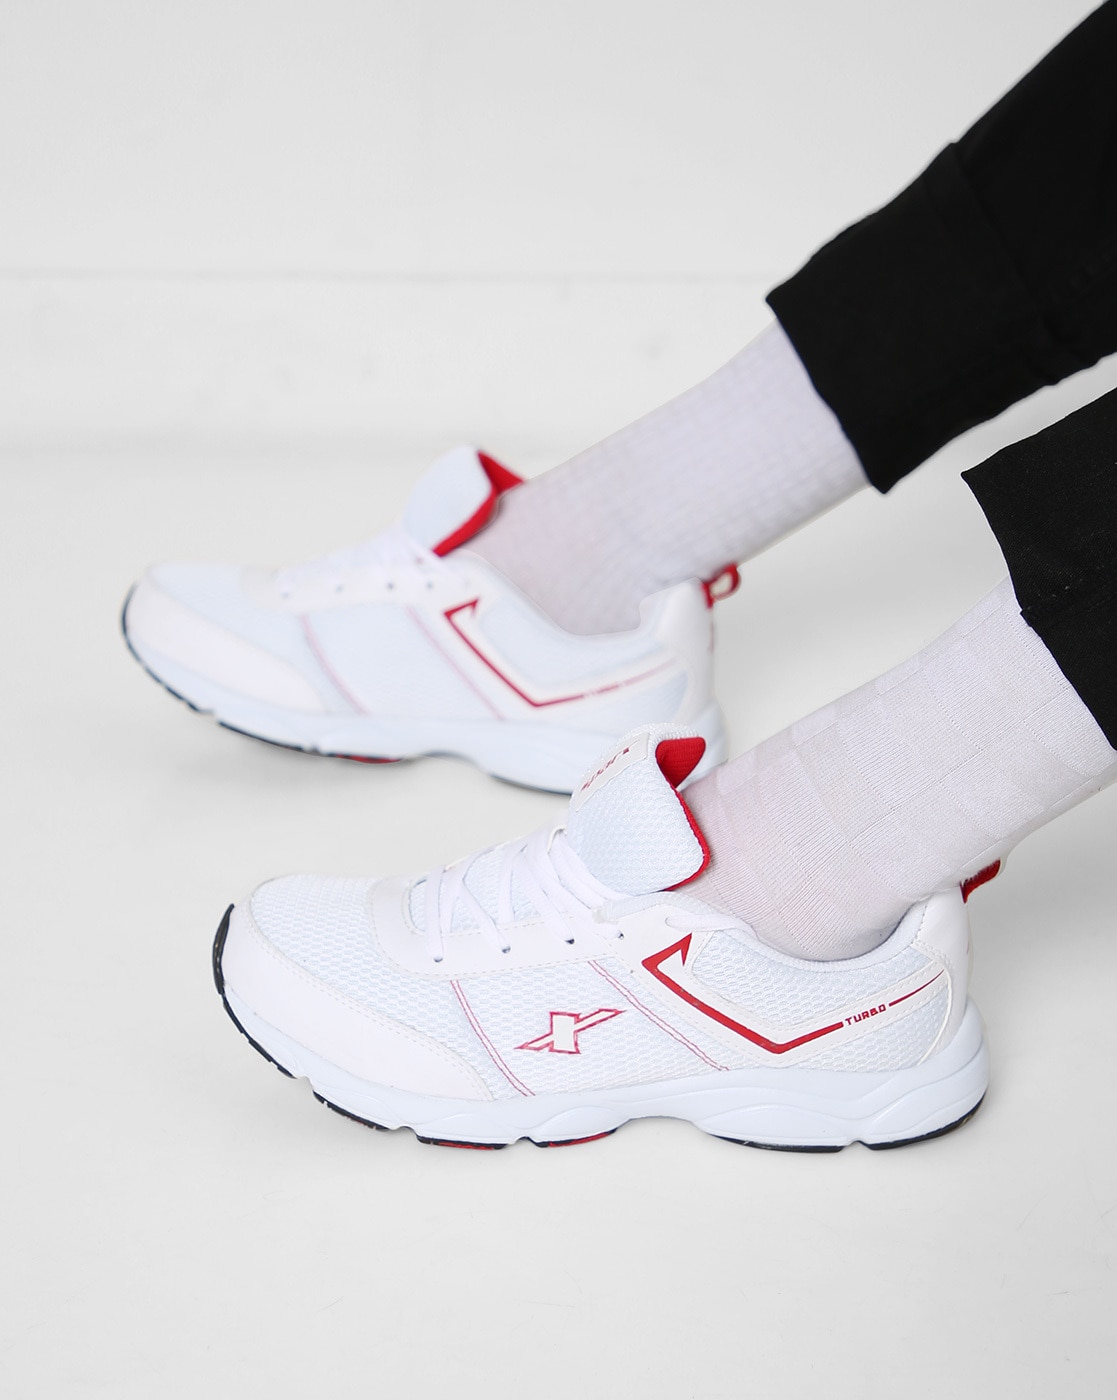 Aggregate 103+ sparx white shoes sneakers best